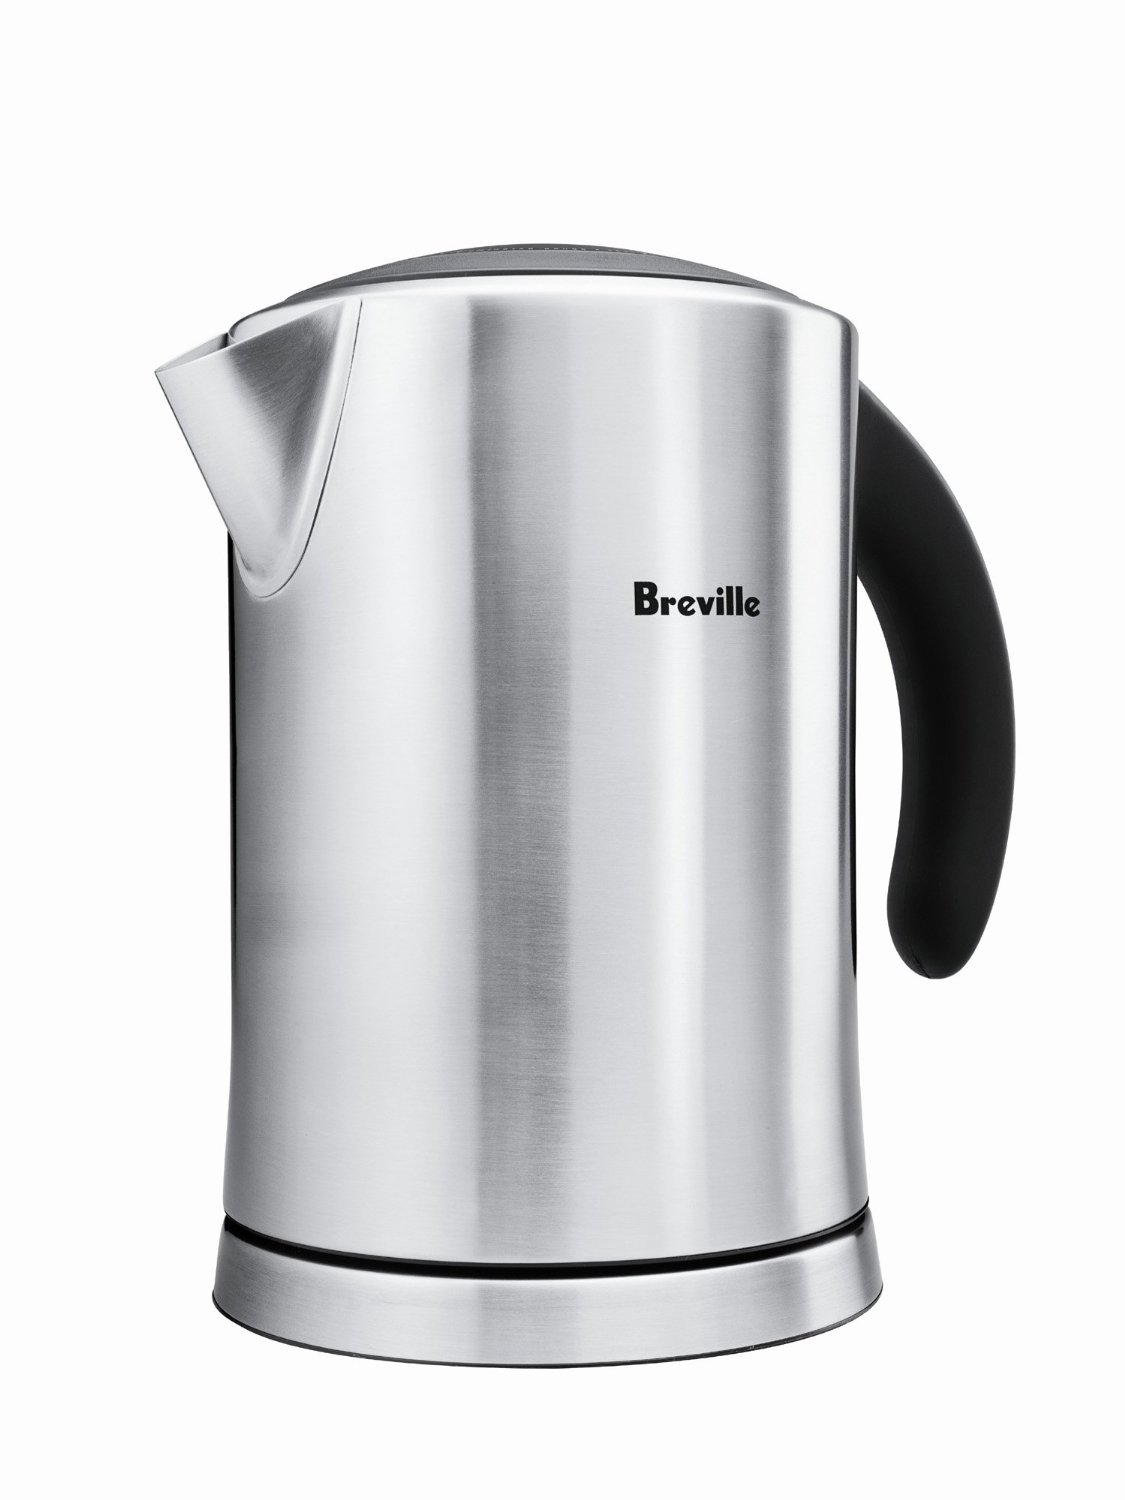 Breville SK500XL Ikon Cordless 1.7-Liter Stainless-Steel Electric Kettle